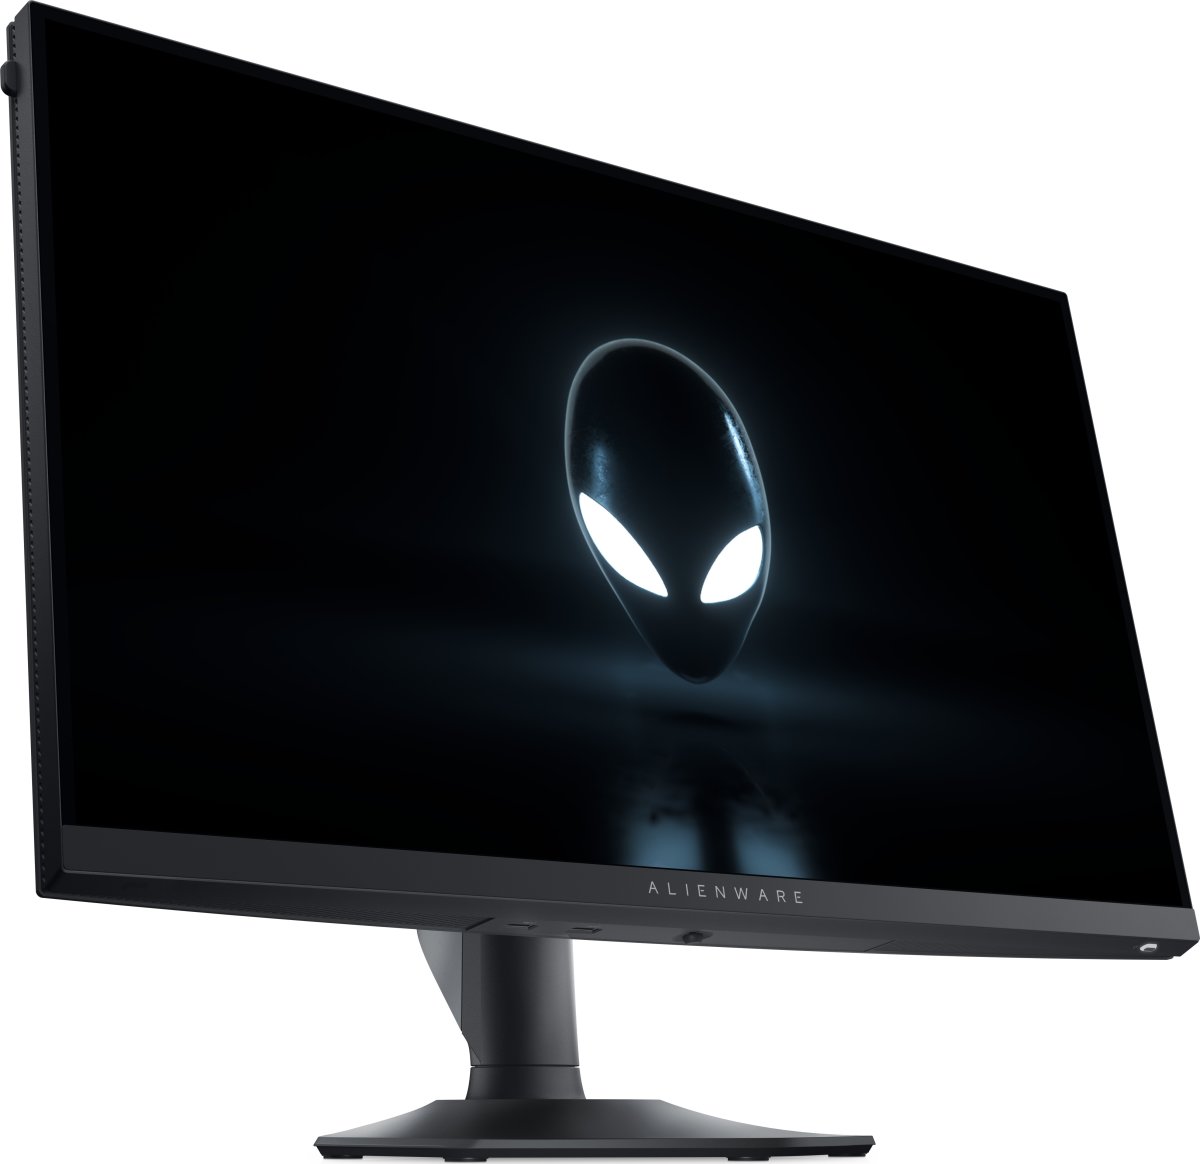 Dell Alienware AW2724HF 27" gaming monitor